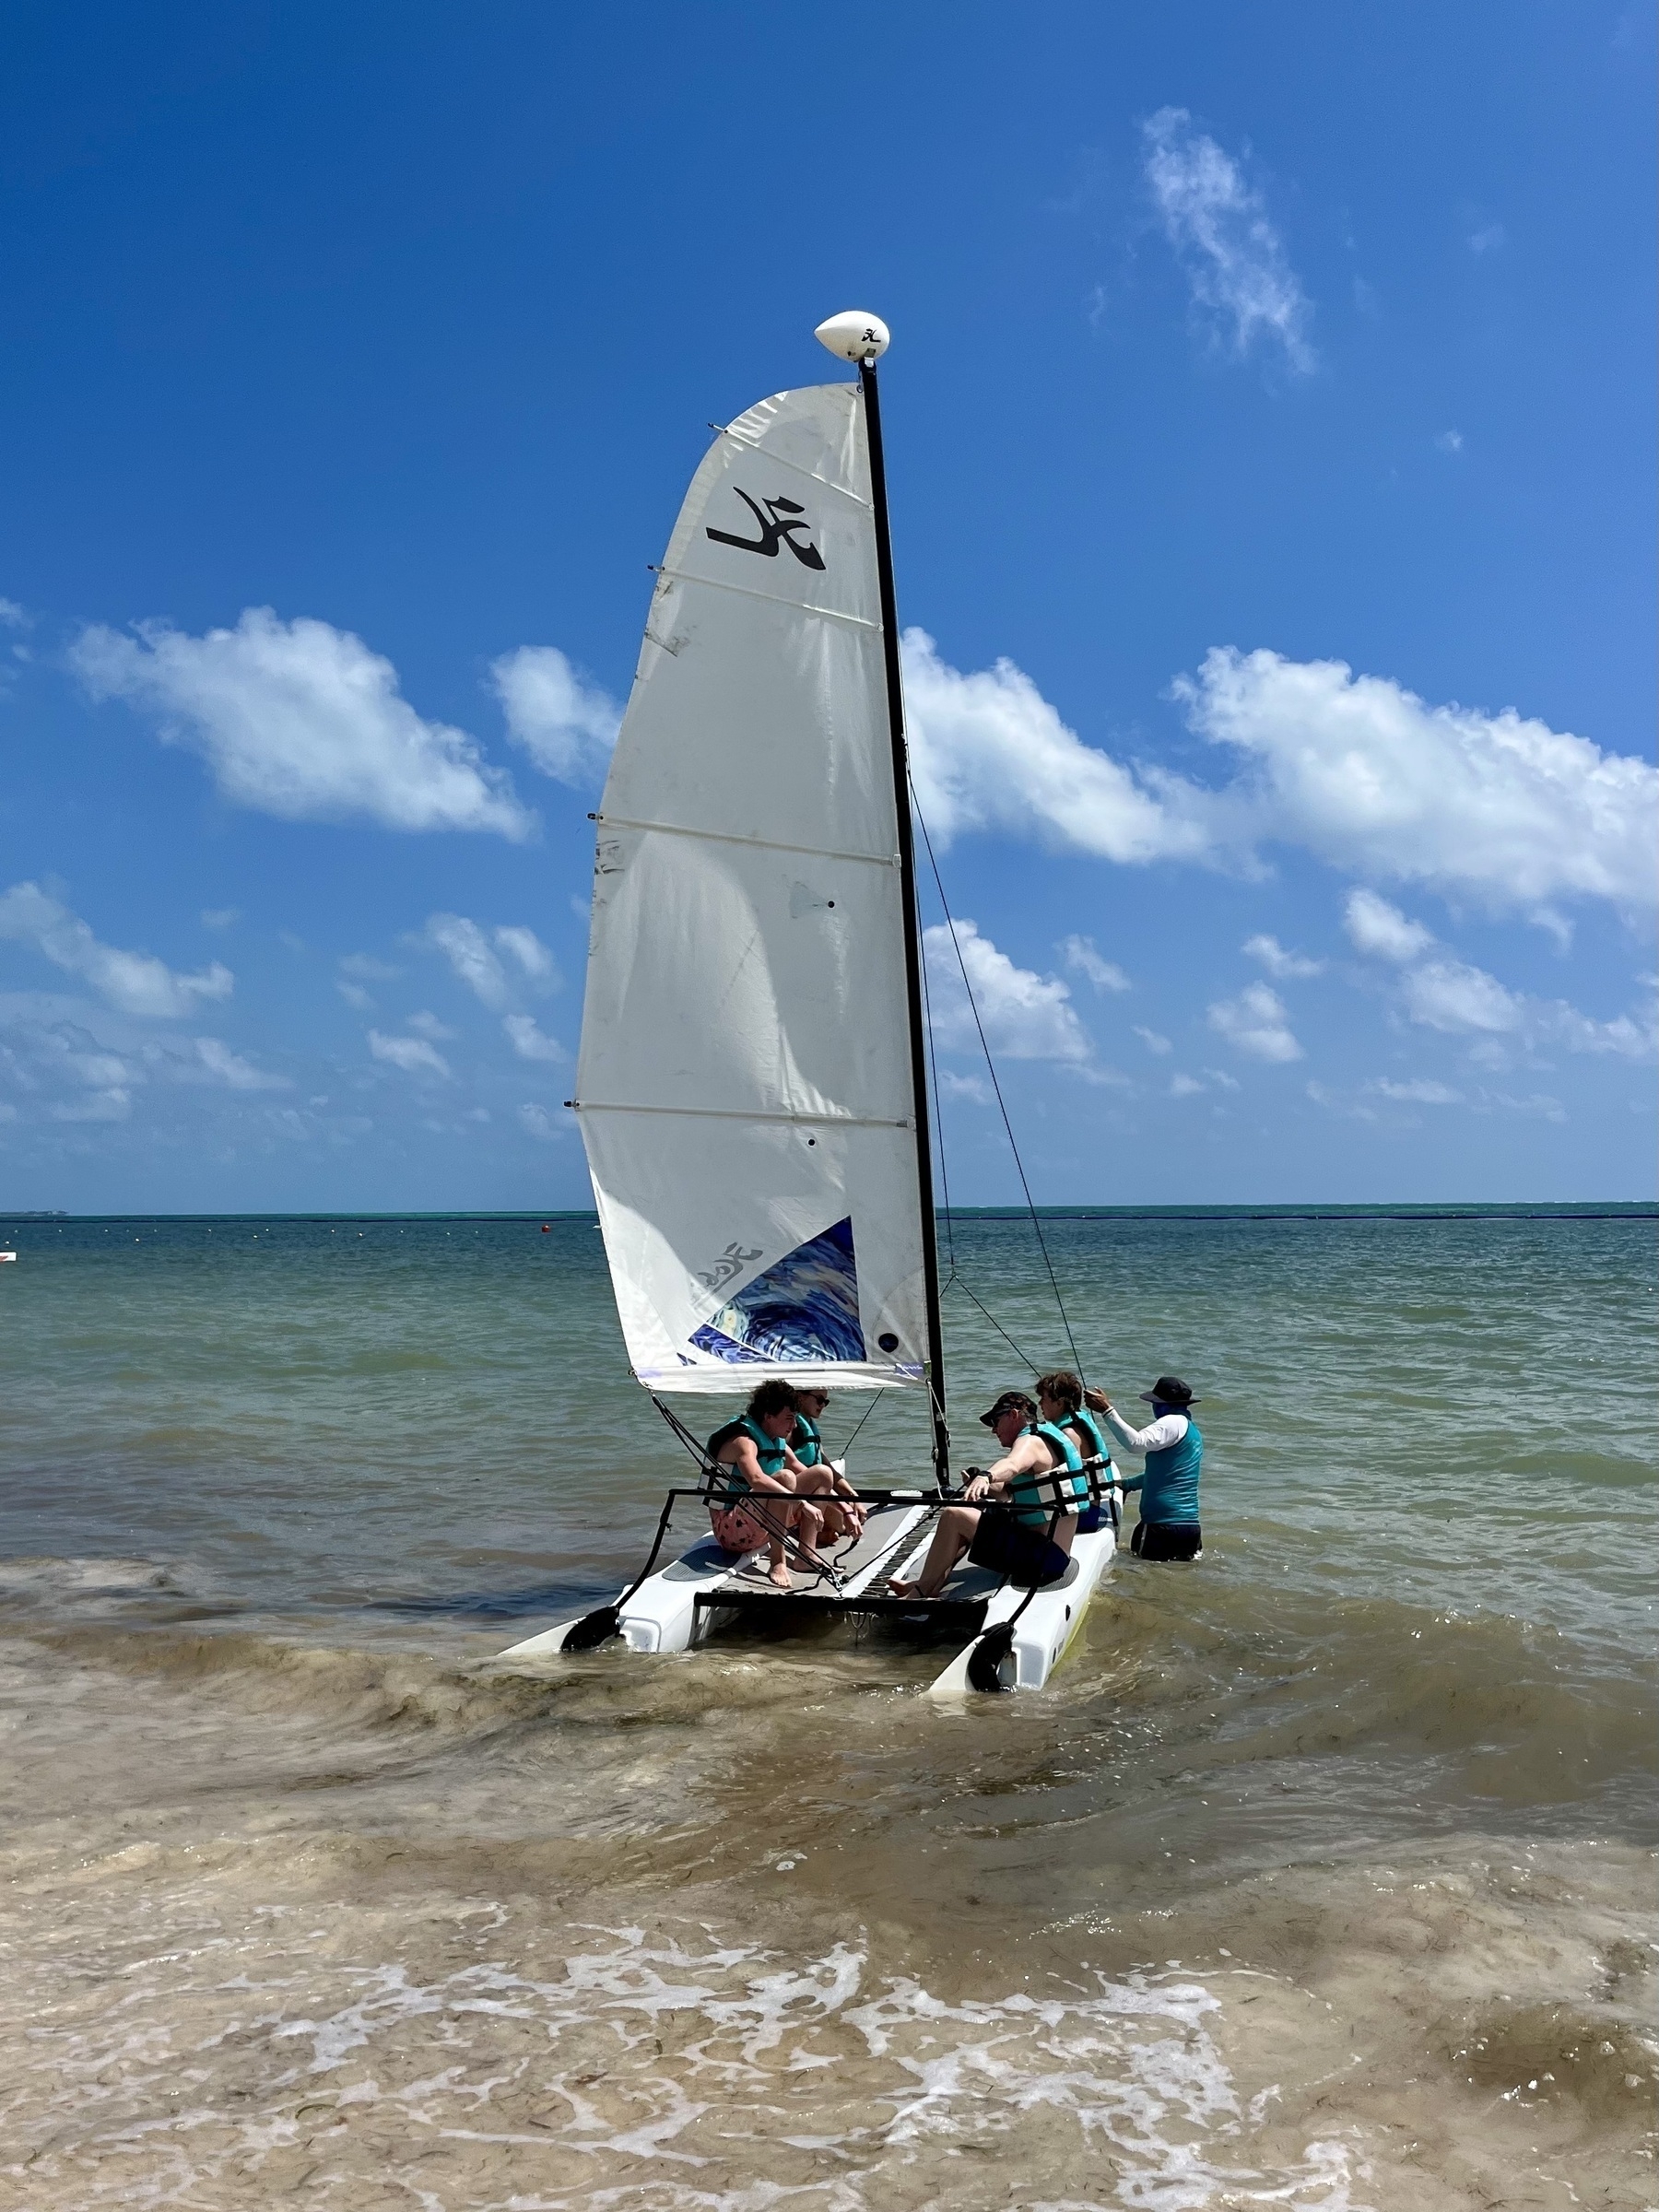 A catamaran with a raised sail is on the shore, with people preparing to sail in a sunny, beachside setting with clear skies.